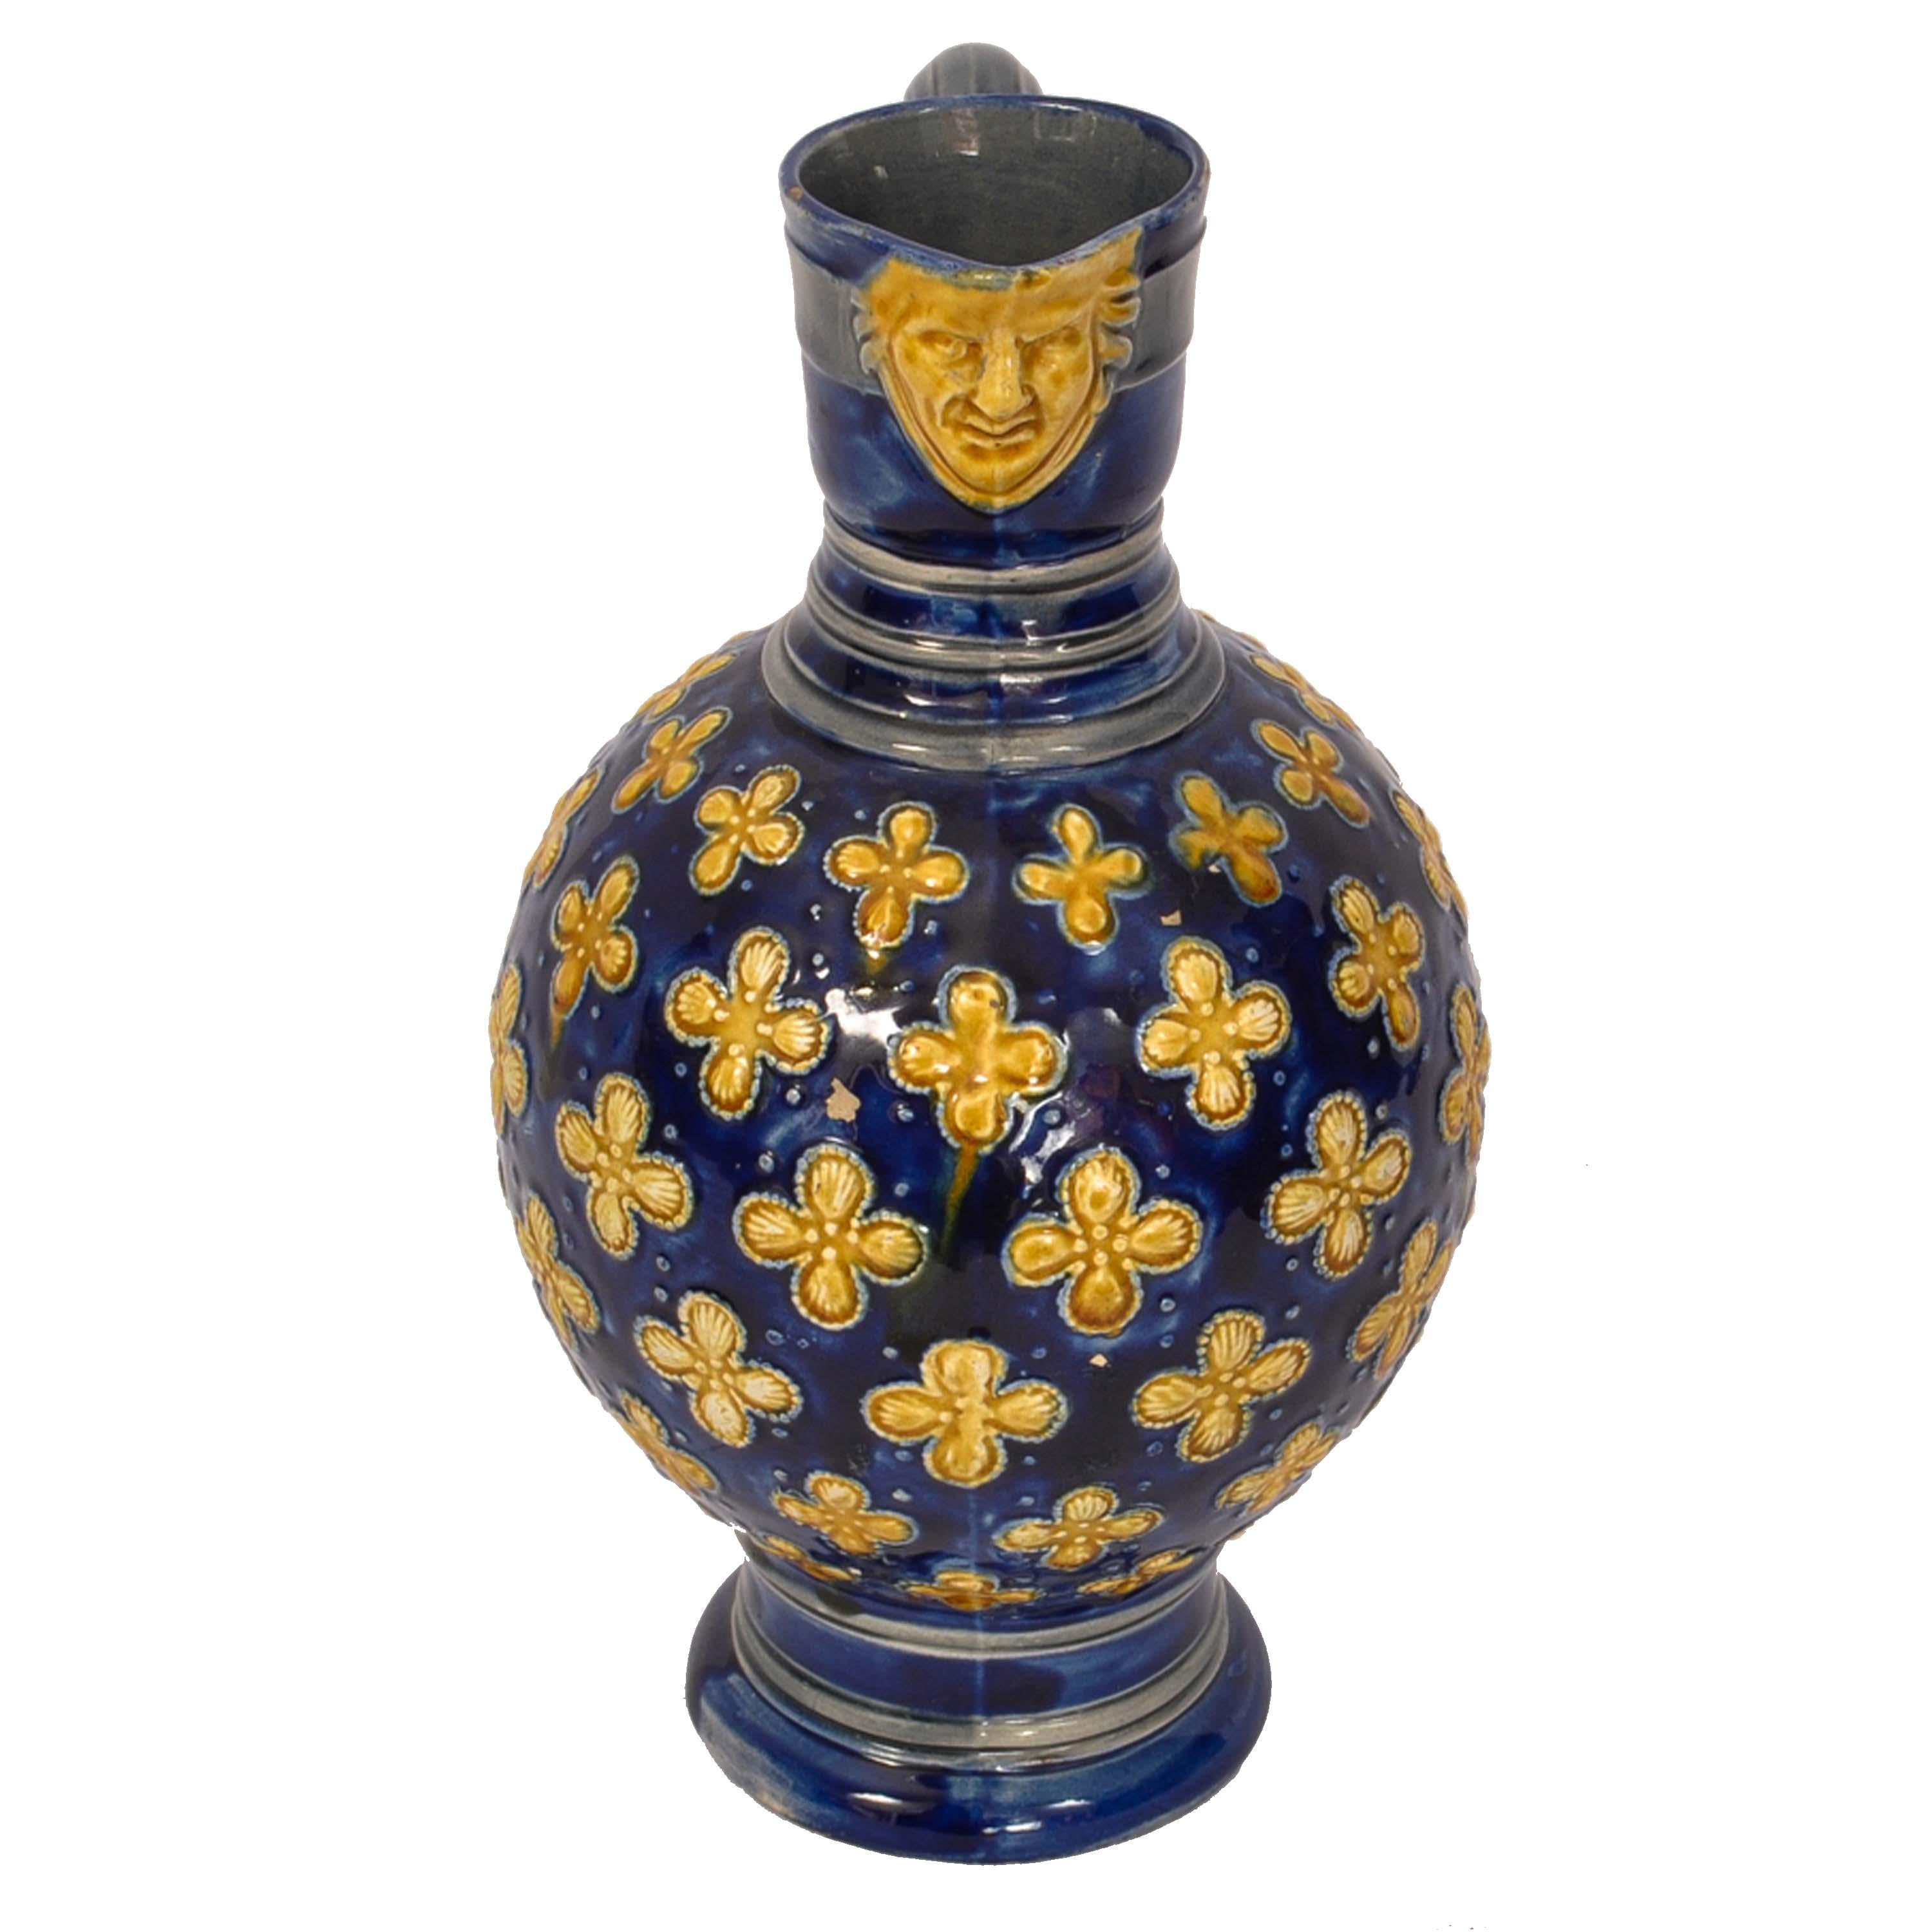 Antique English Minton majolica jug/pitcher, circa 1870.
A very handsome majolica jug, with a cobalt blue background, the spout of the jug is decorated with a yellow glazed mask of a gentleman. The neck having ring turning below a scrolled handle,